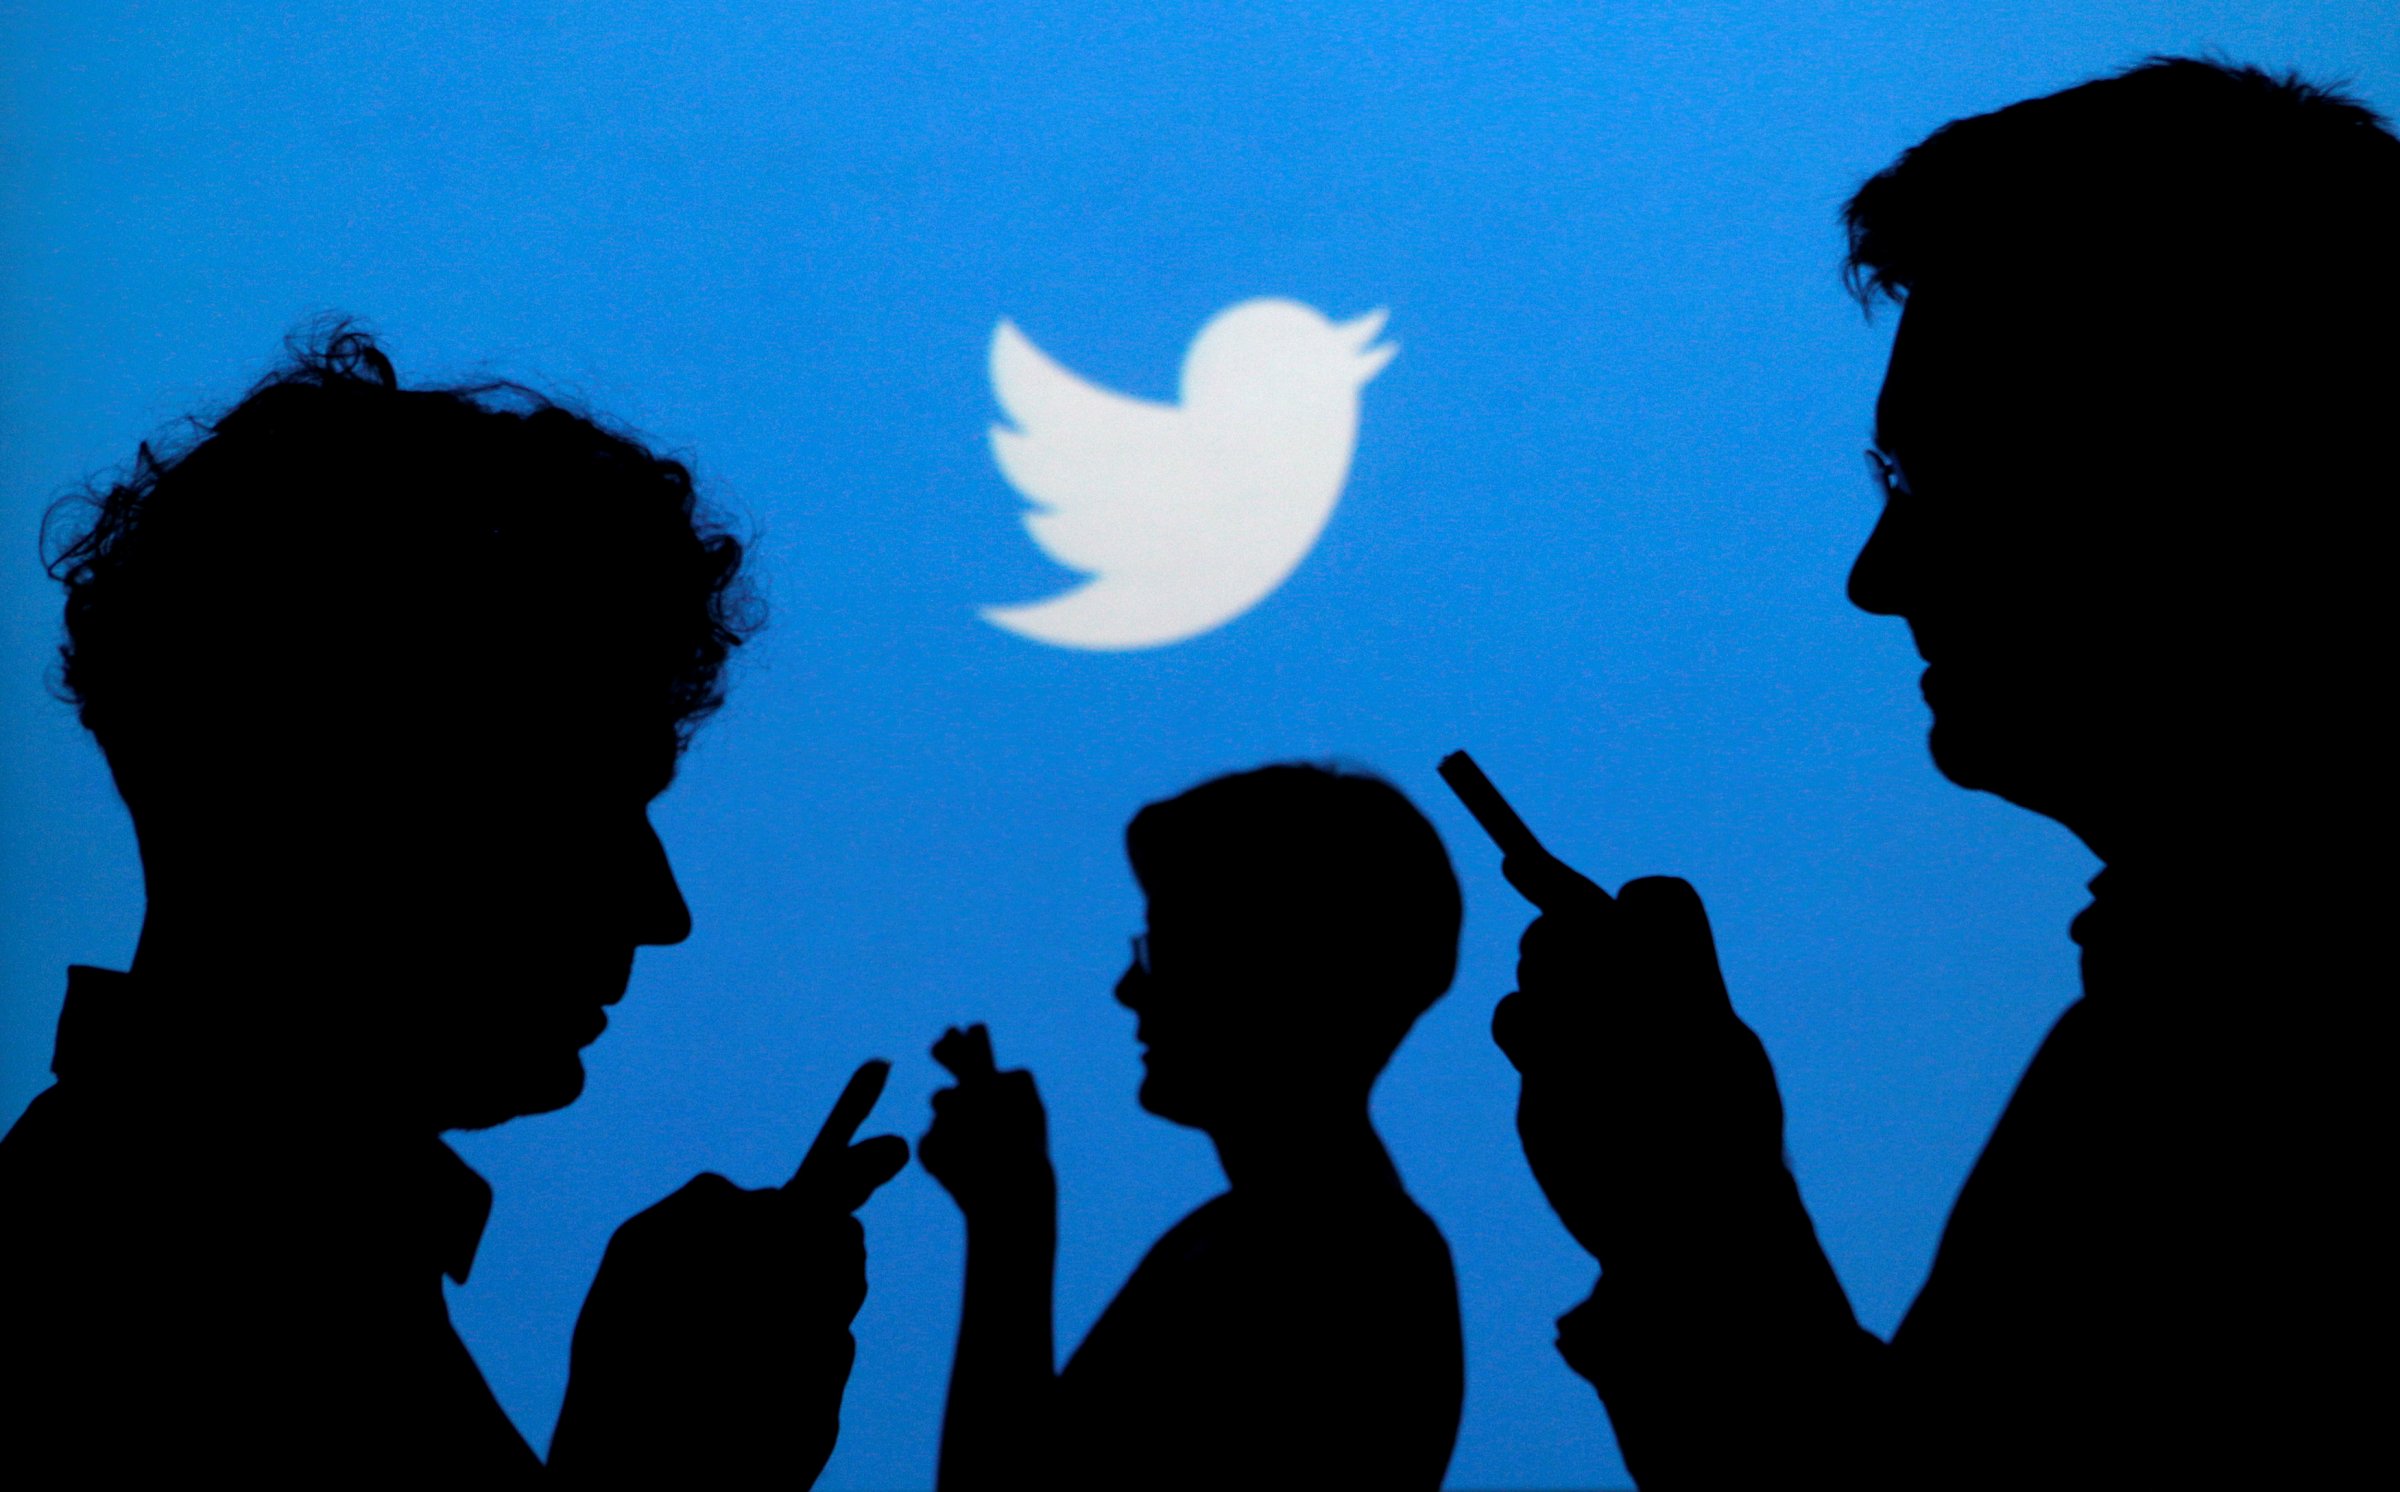 FILE PHOTO -  People holding mobile phones are silhouetted against a backdrop projected with the Twitter logo  in Warsaw